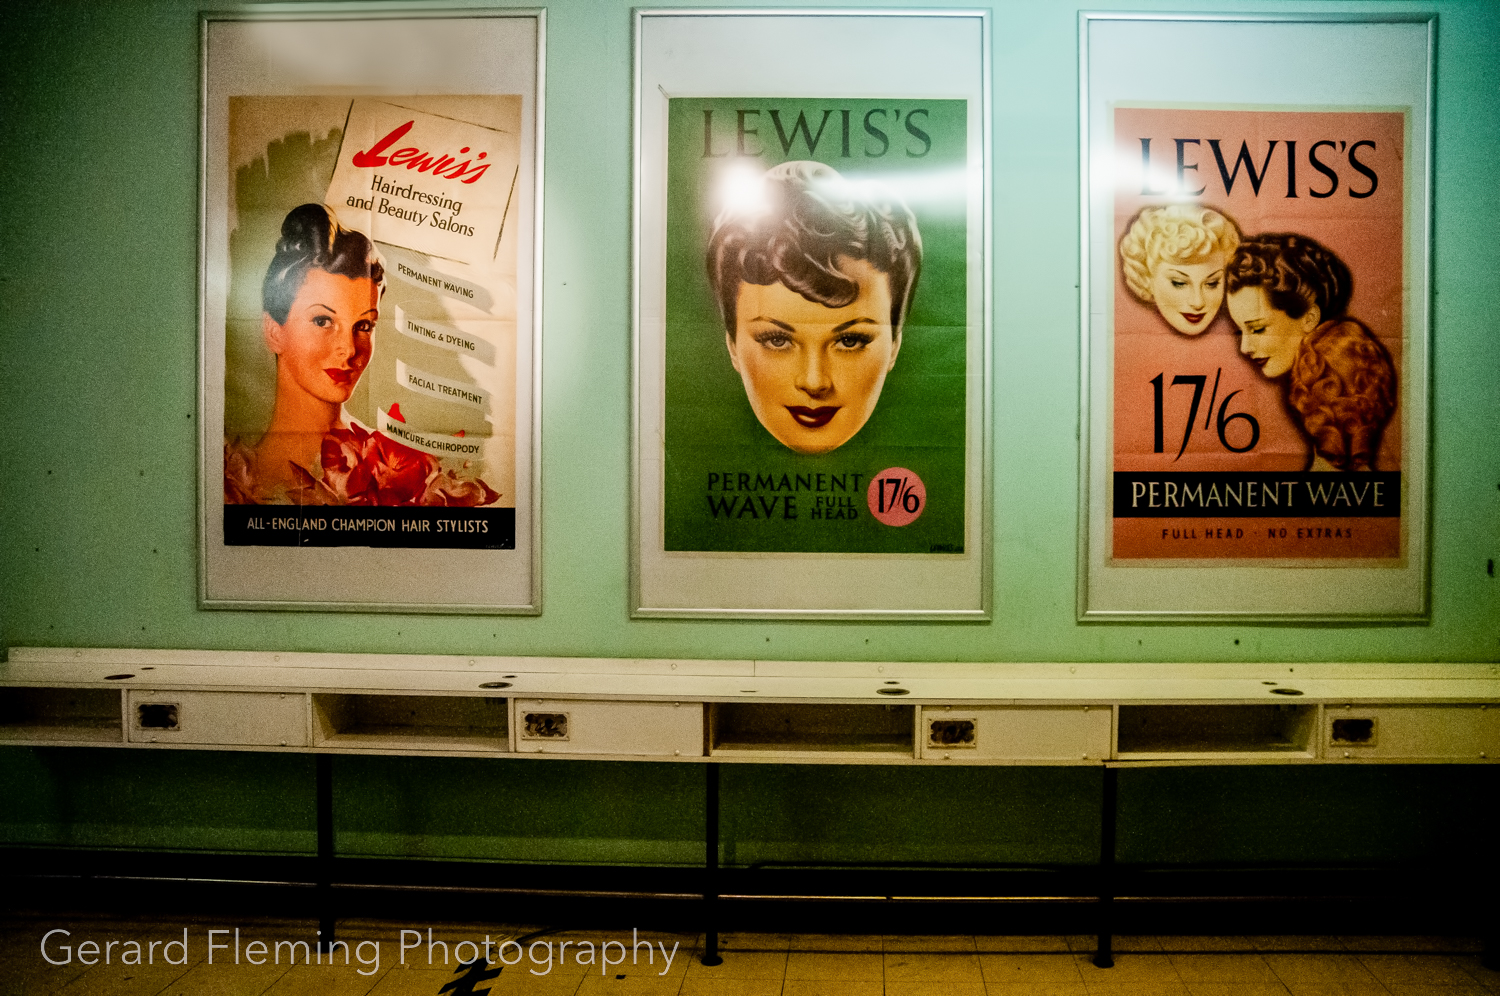 lewis's liverpool glemby hair dressing salon